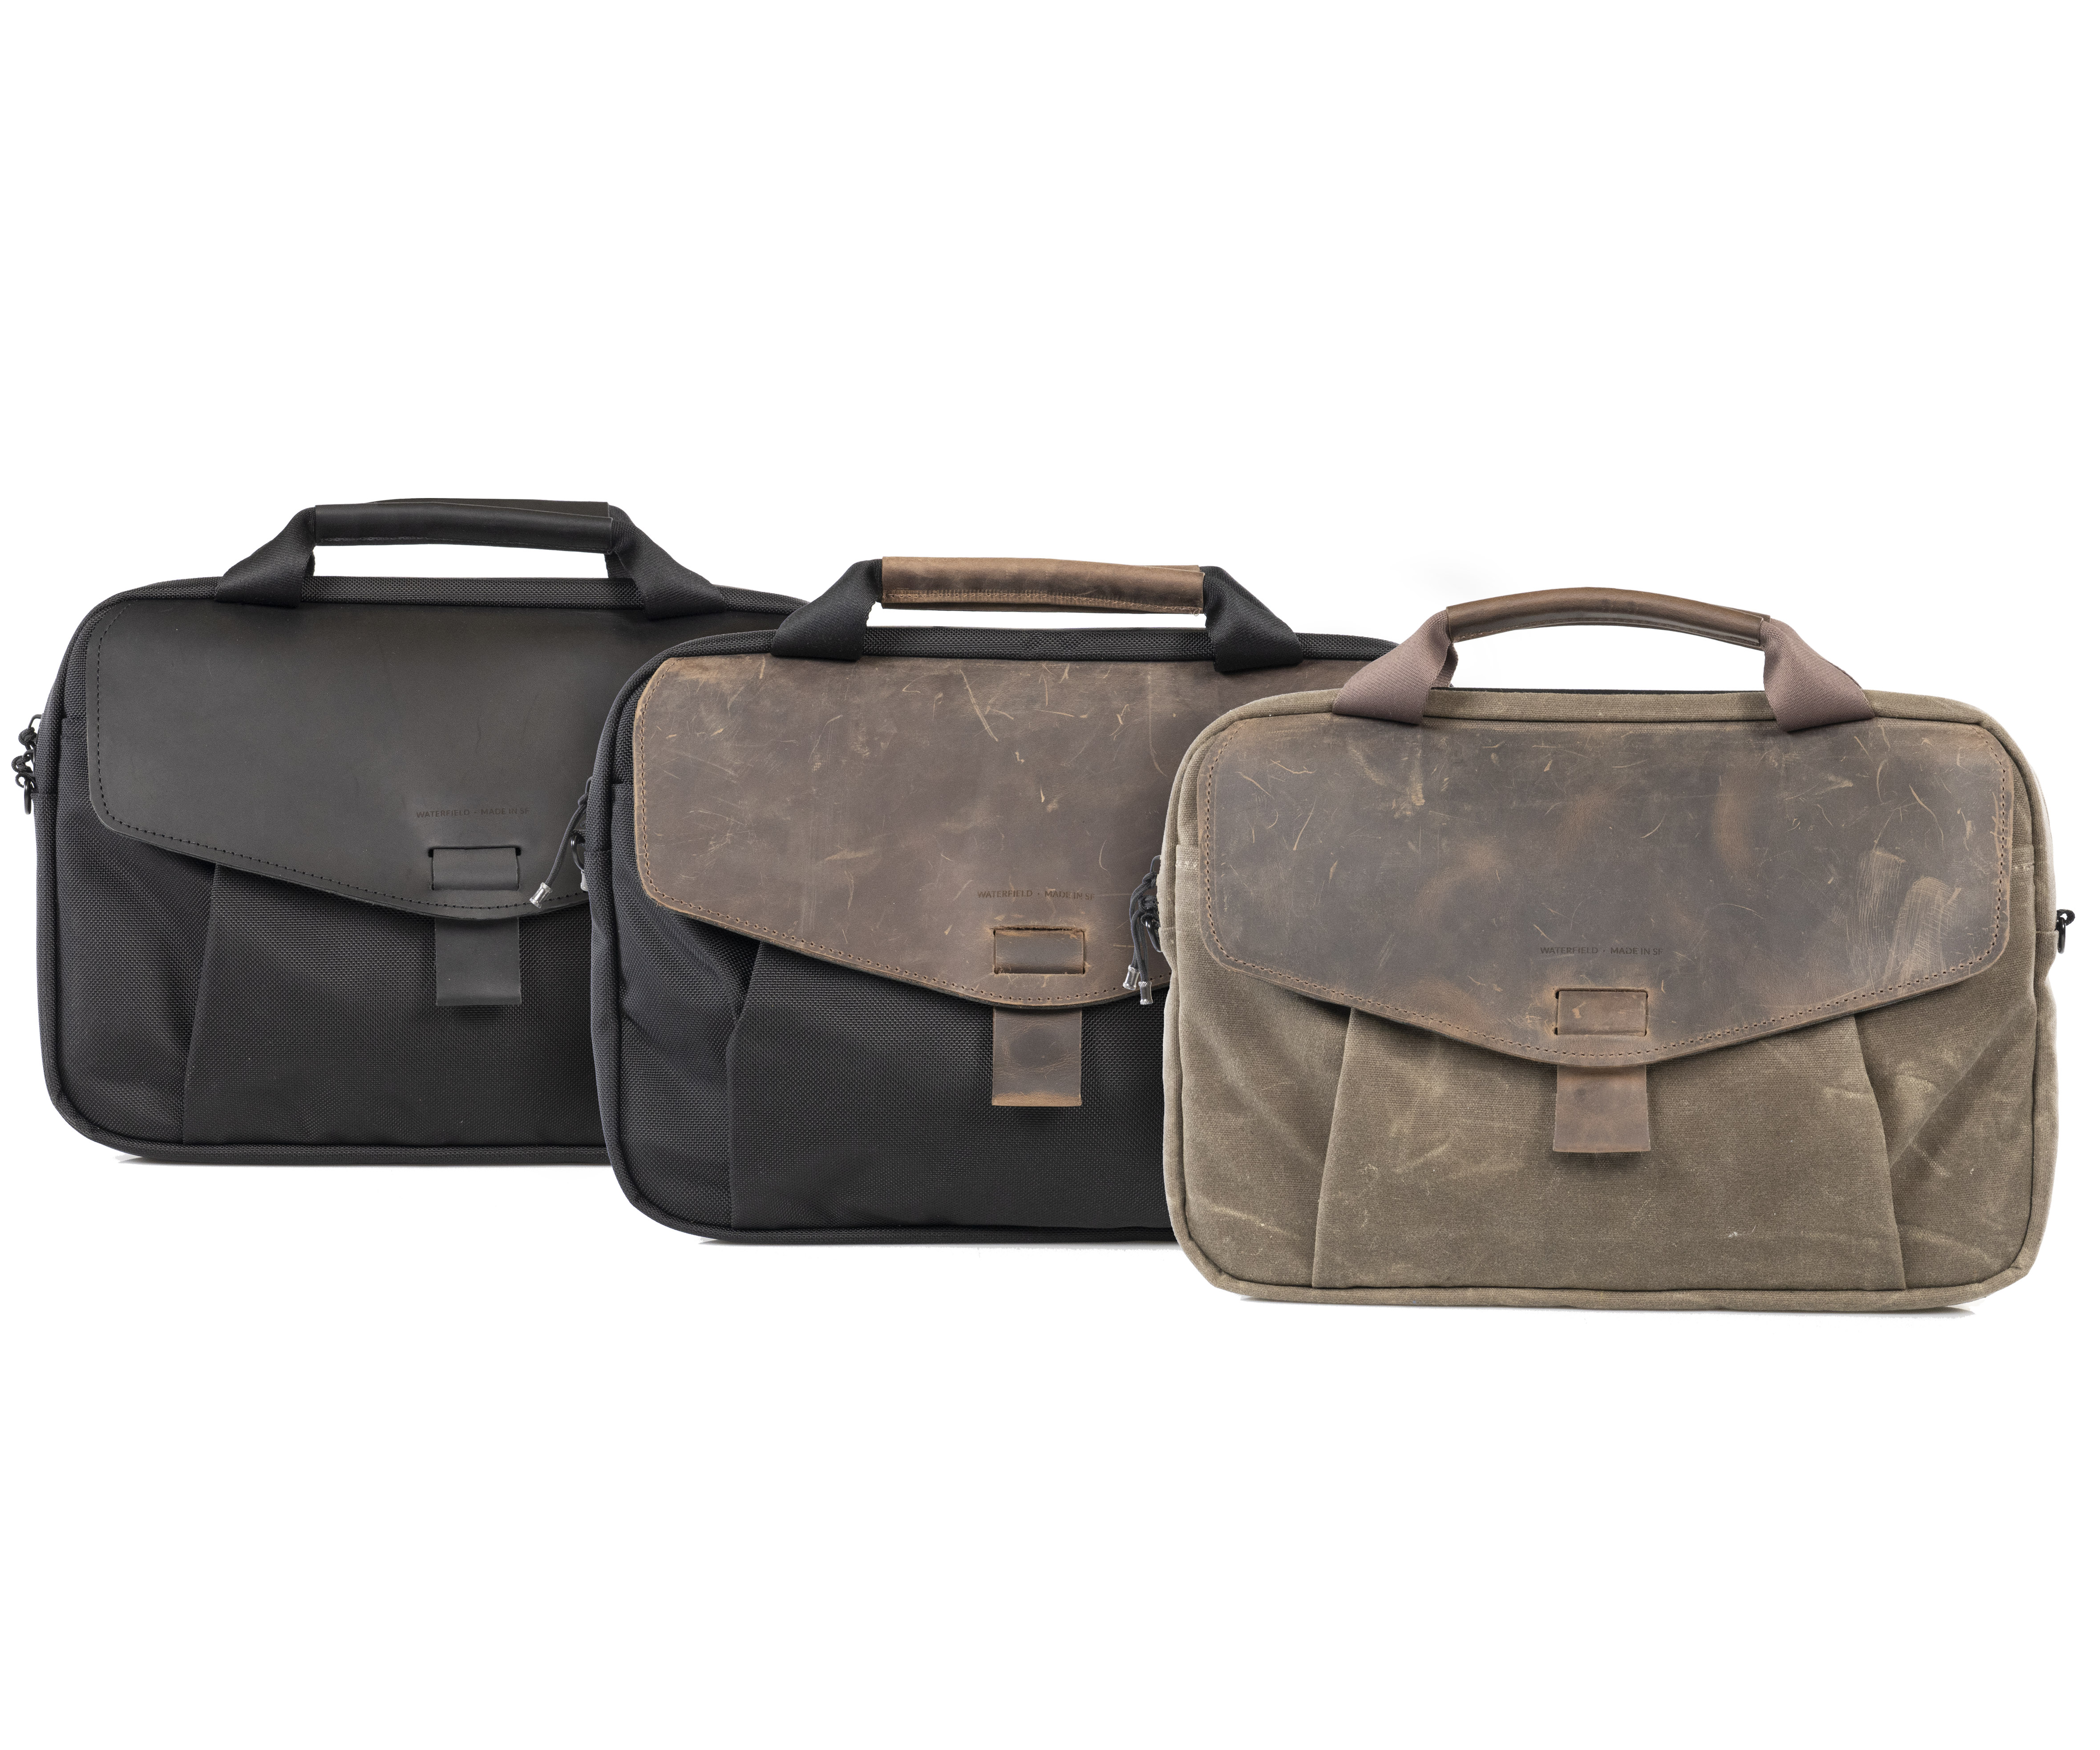 The Outback Duo in three color options